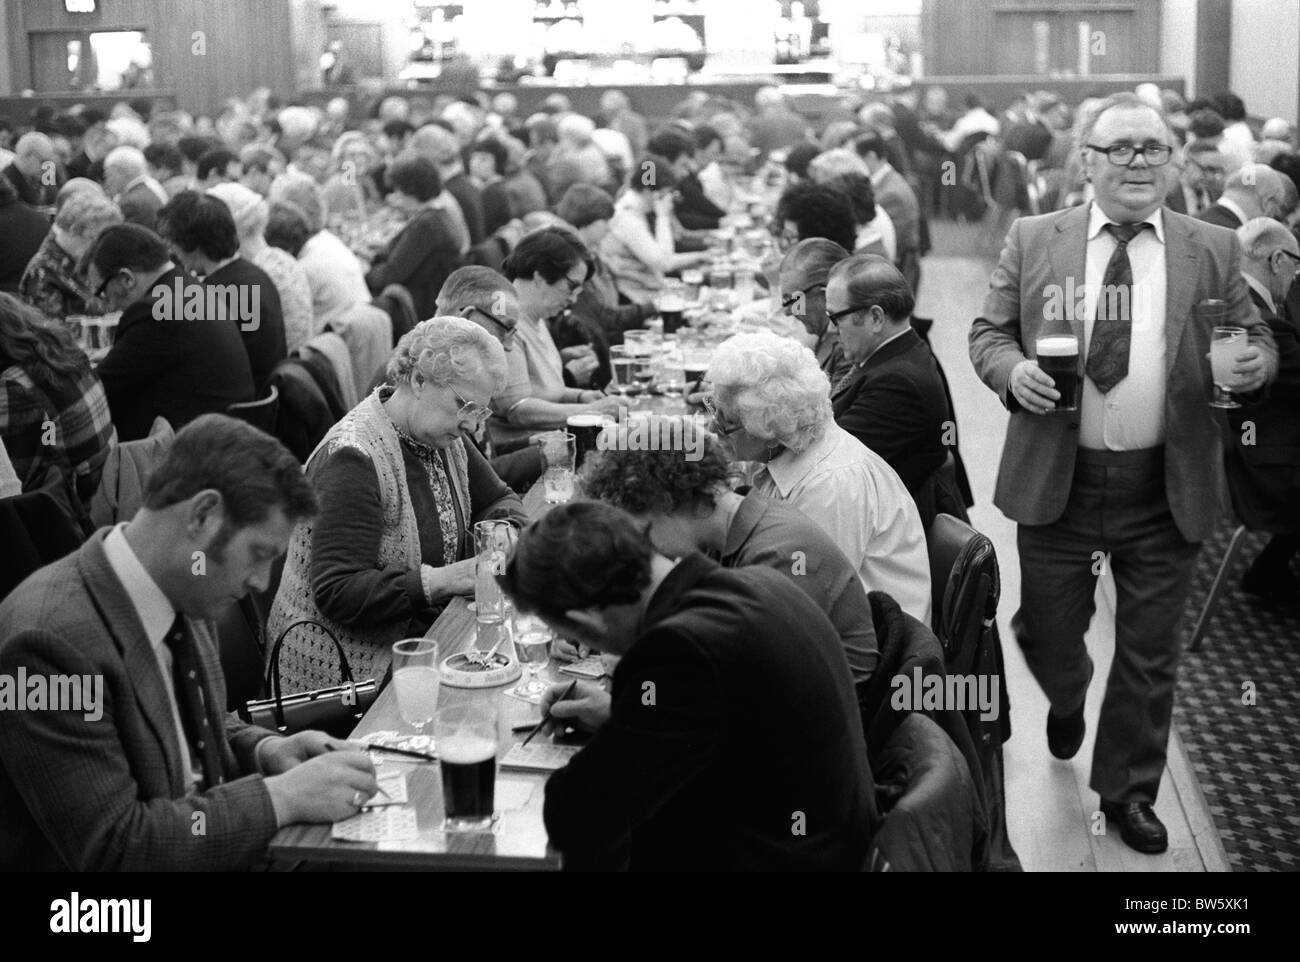 Coventry Working Mens Club, Saturday night Bingo evening entertainment. Crowds of members enjoy a social evening amongst friends and colleagues. 1980s England. 80s UK HOMER SYKES Stock Photo